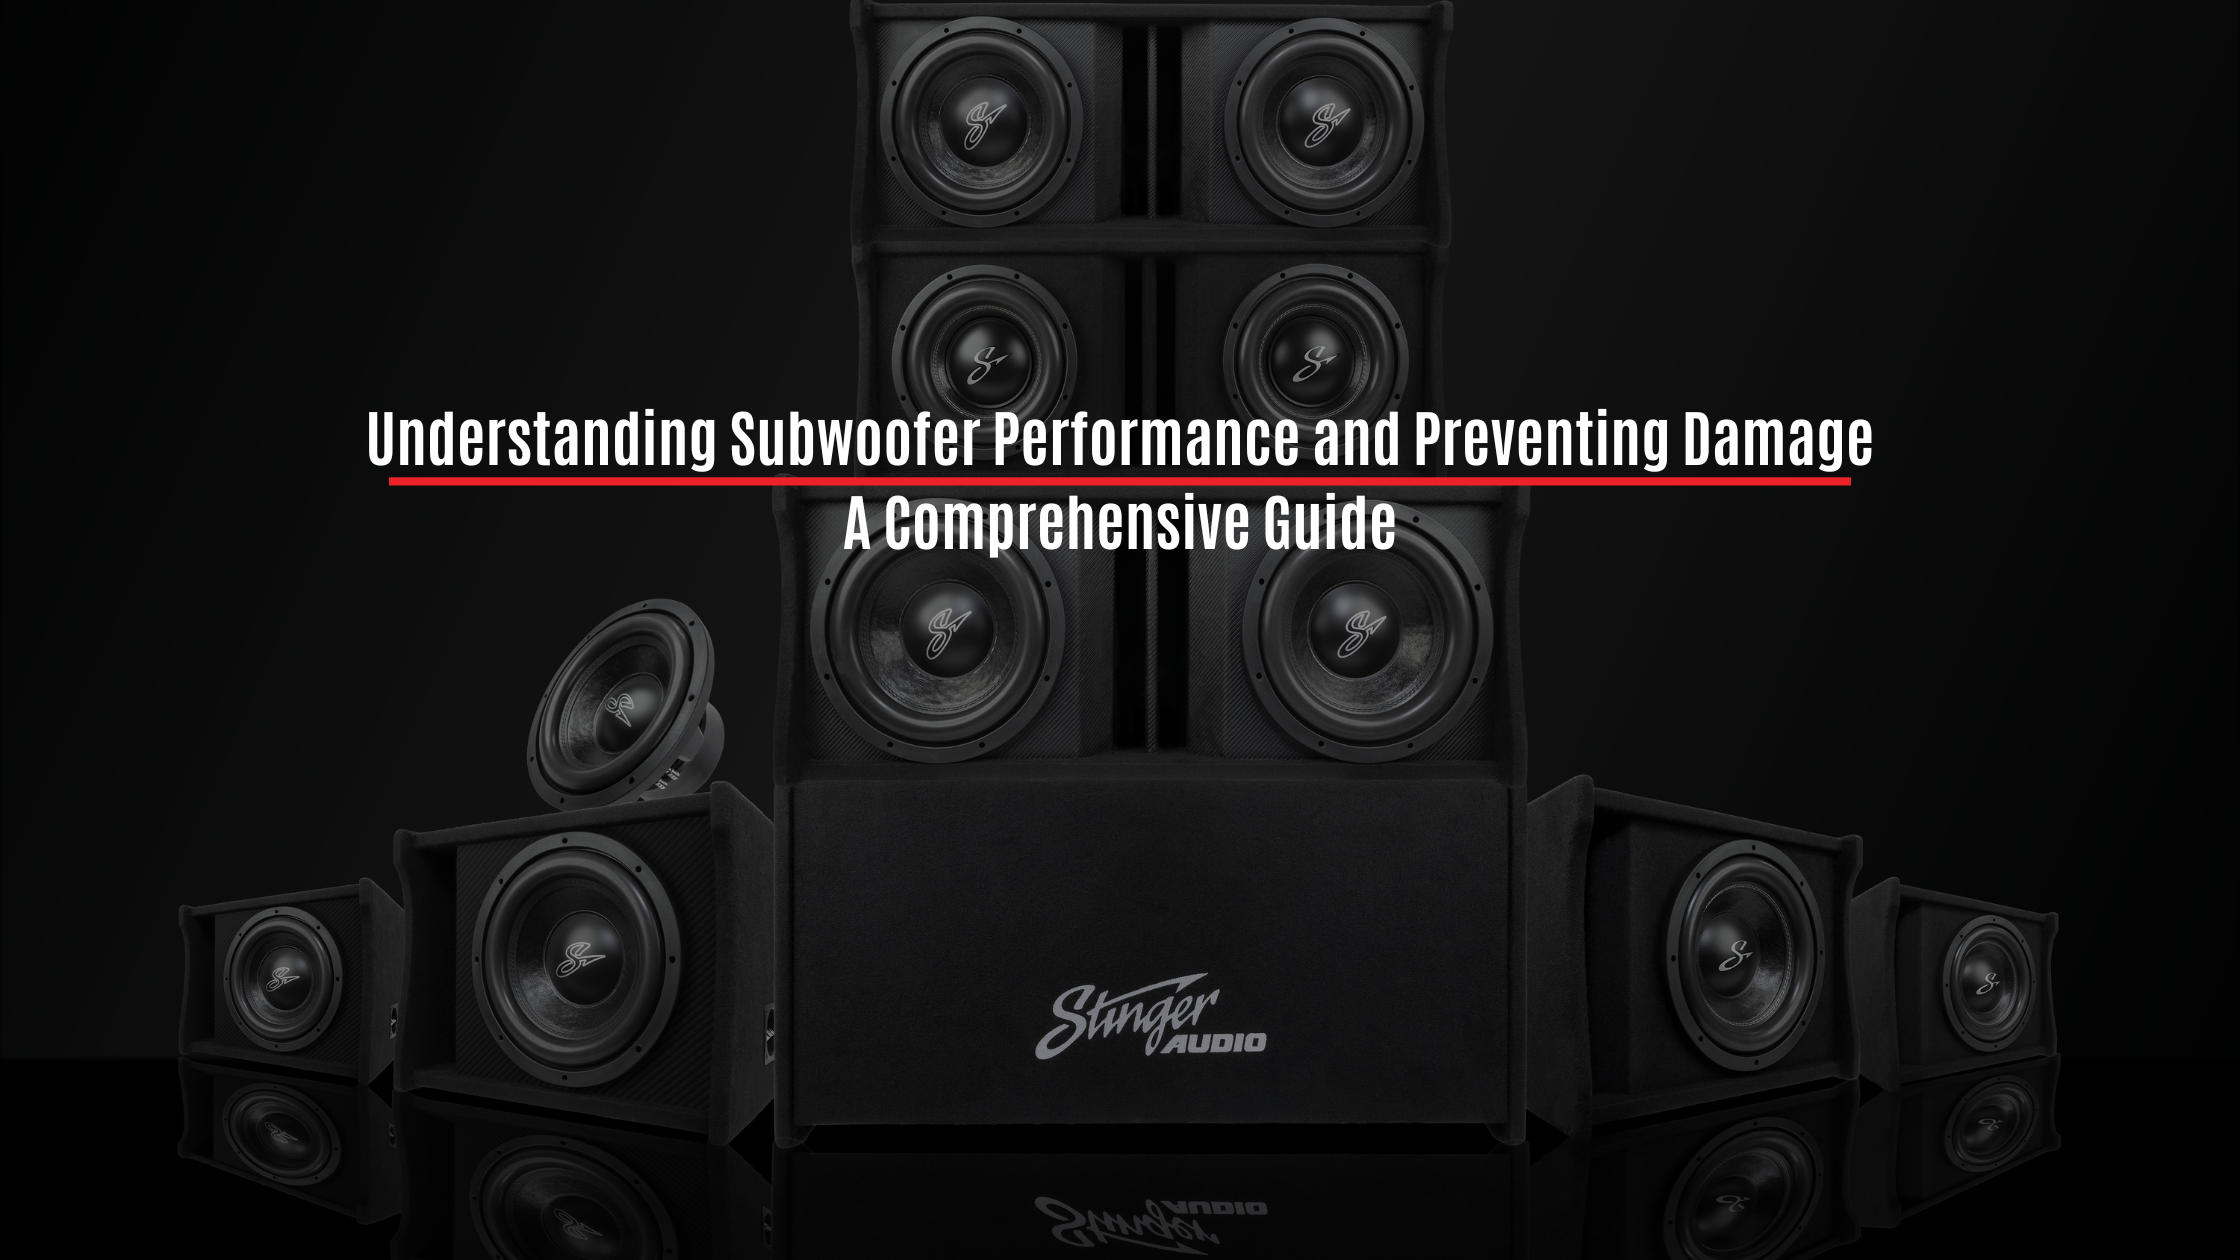 Understanding Subwoofer Performance and Preventing Damage: A Comprehensive Guide